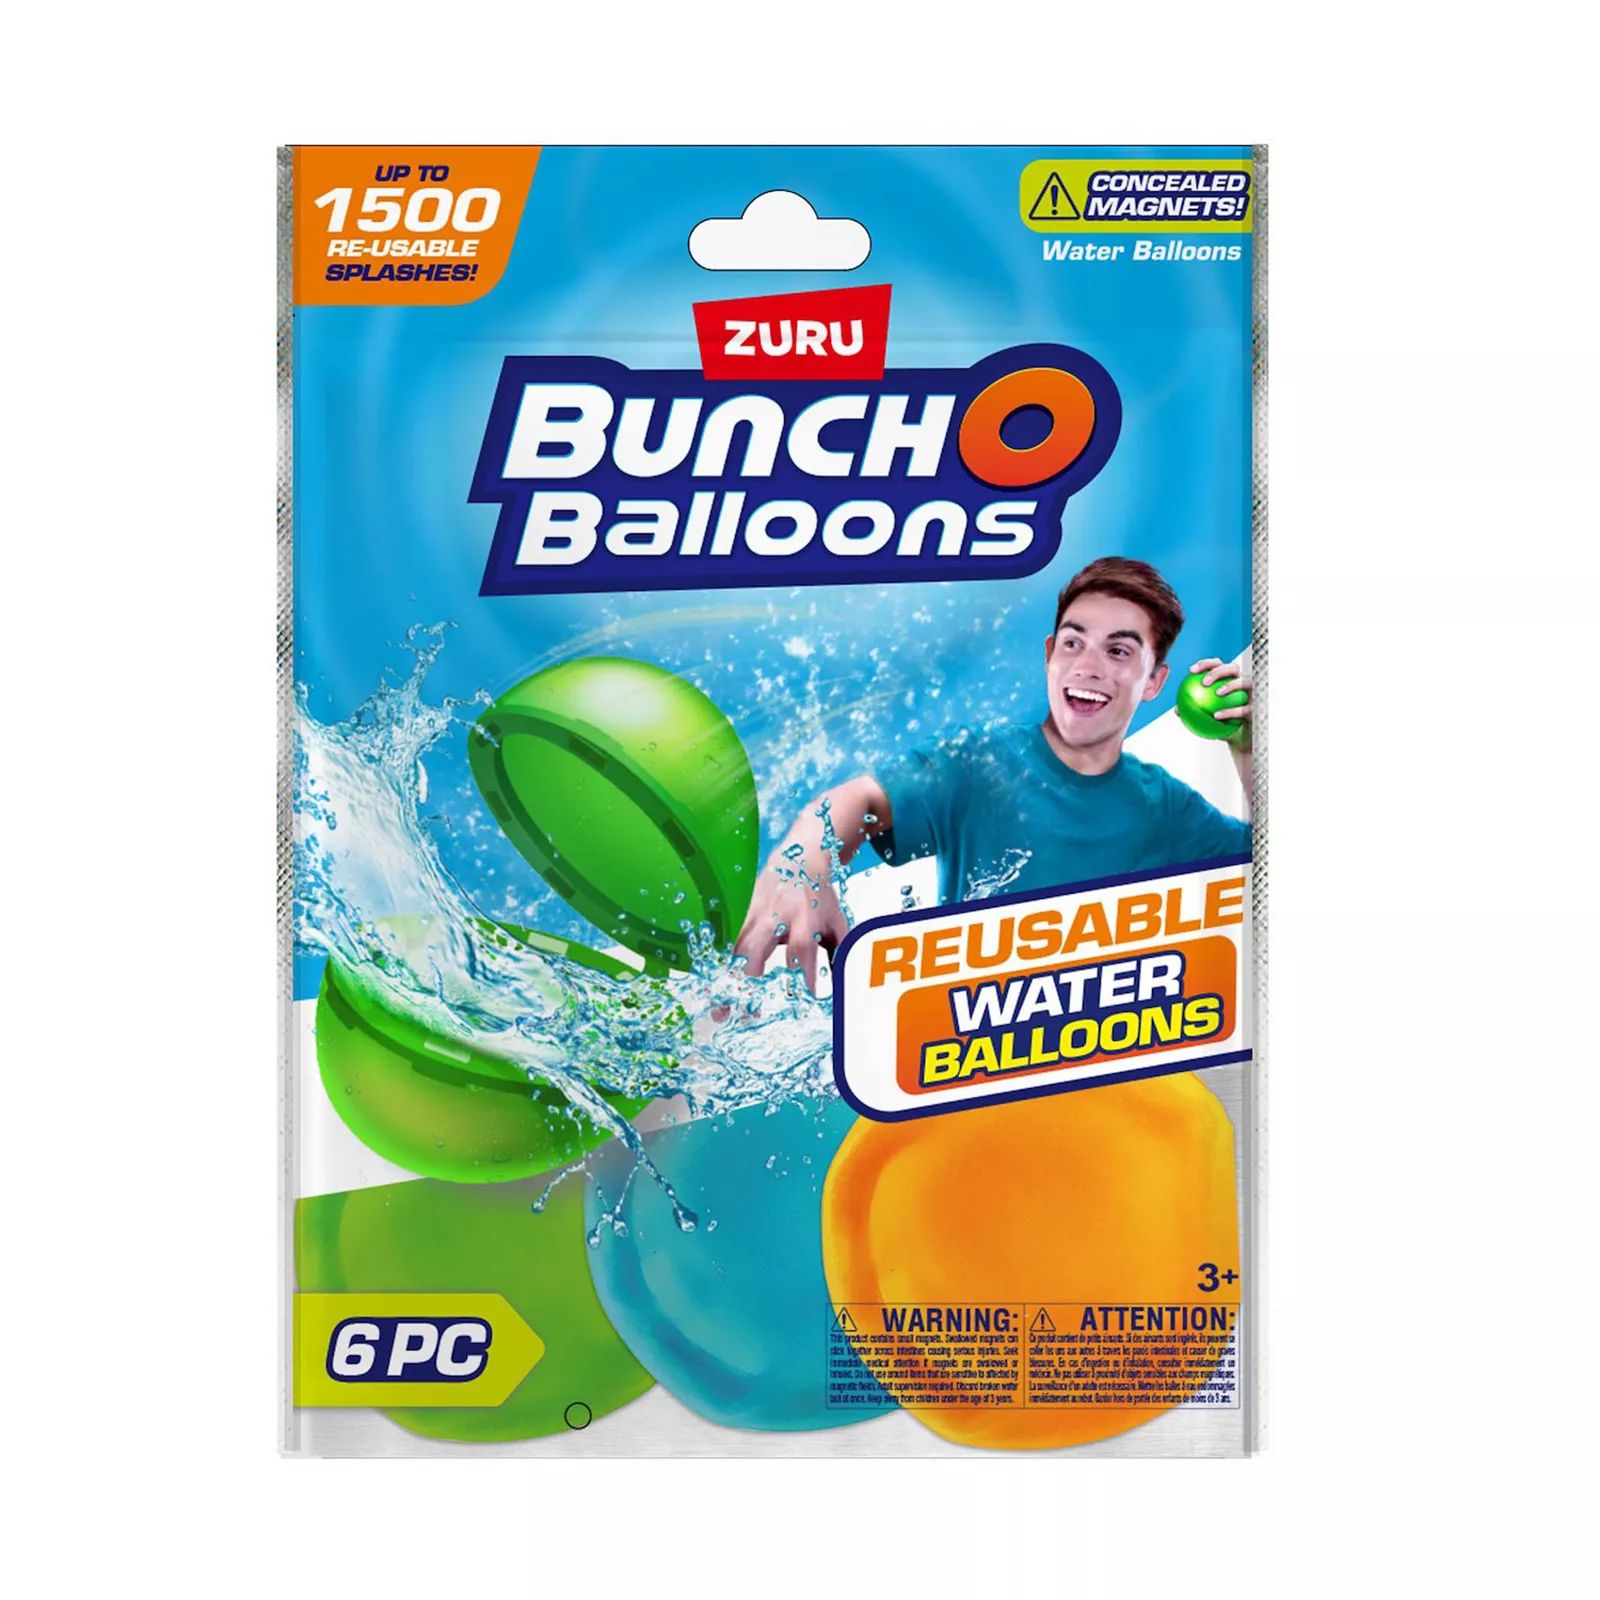 Bunch O Balloons Reusable Water Balloons 6-Pack by ZURU, Multicolor | Kohl's